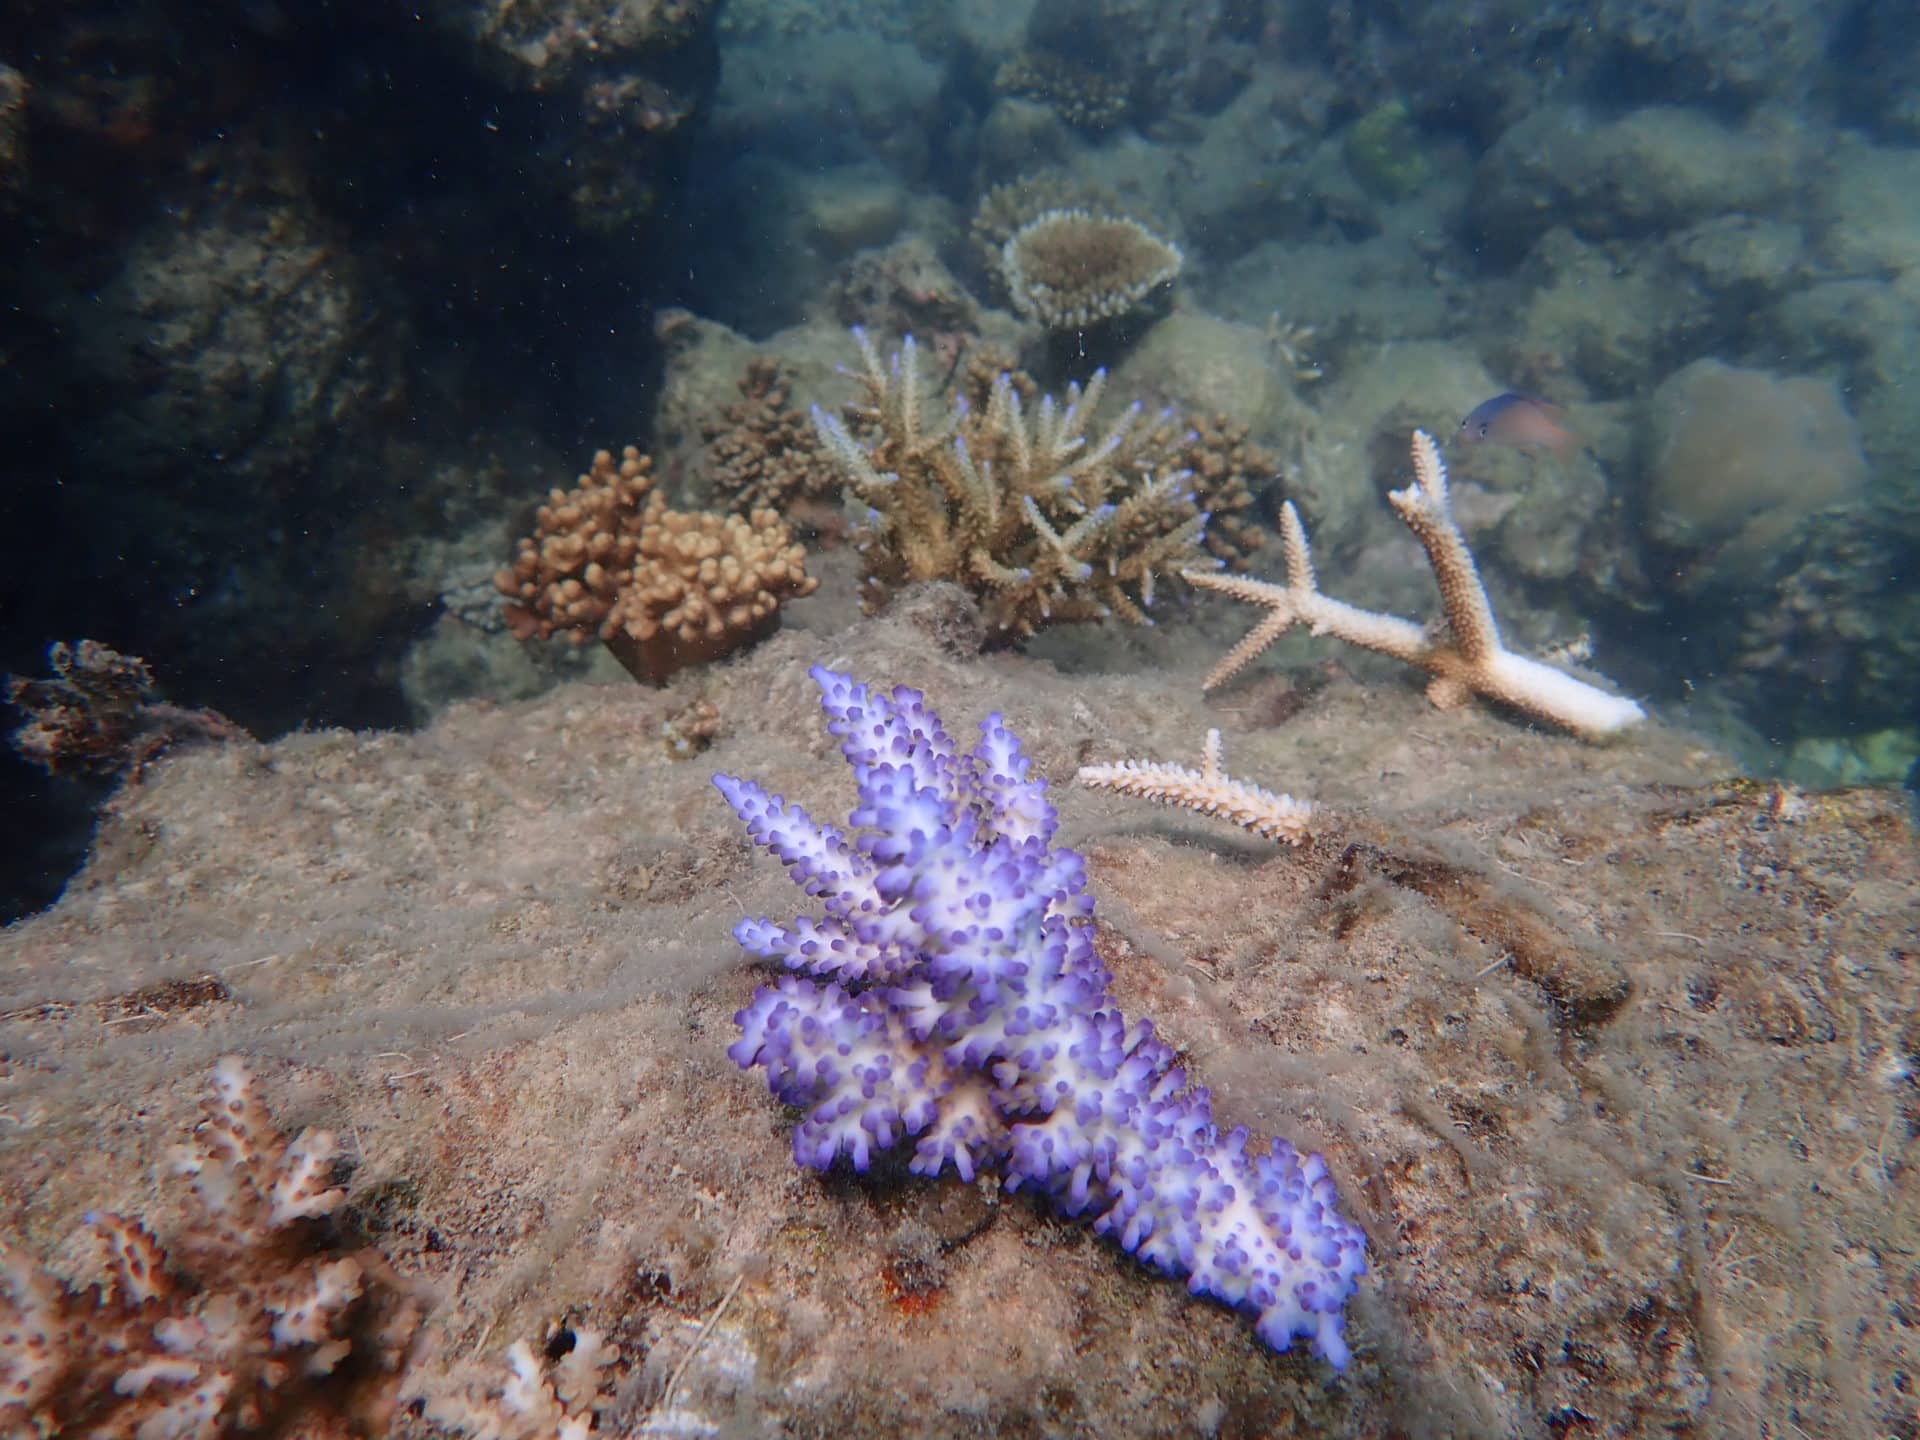 Underwater photo of a coral reef on 16 Apr 20